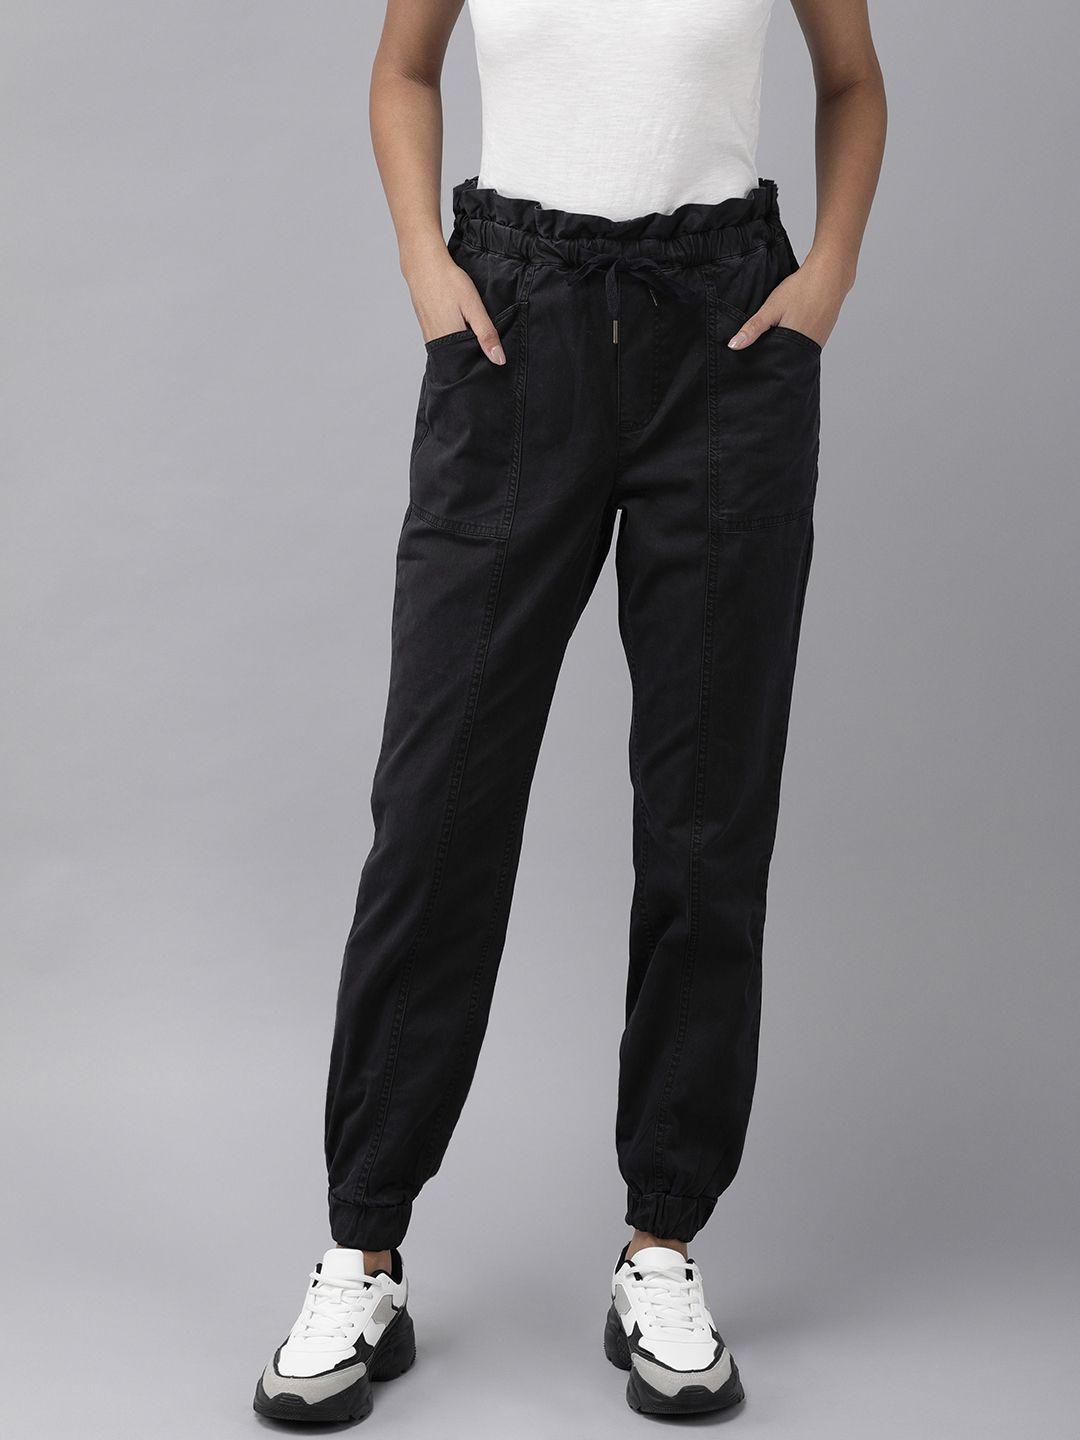 the roadster lifestyle co women black solid paper bag joggers trousers